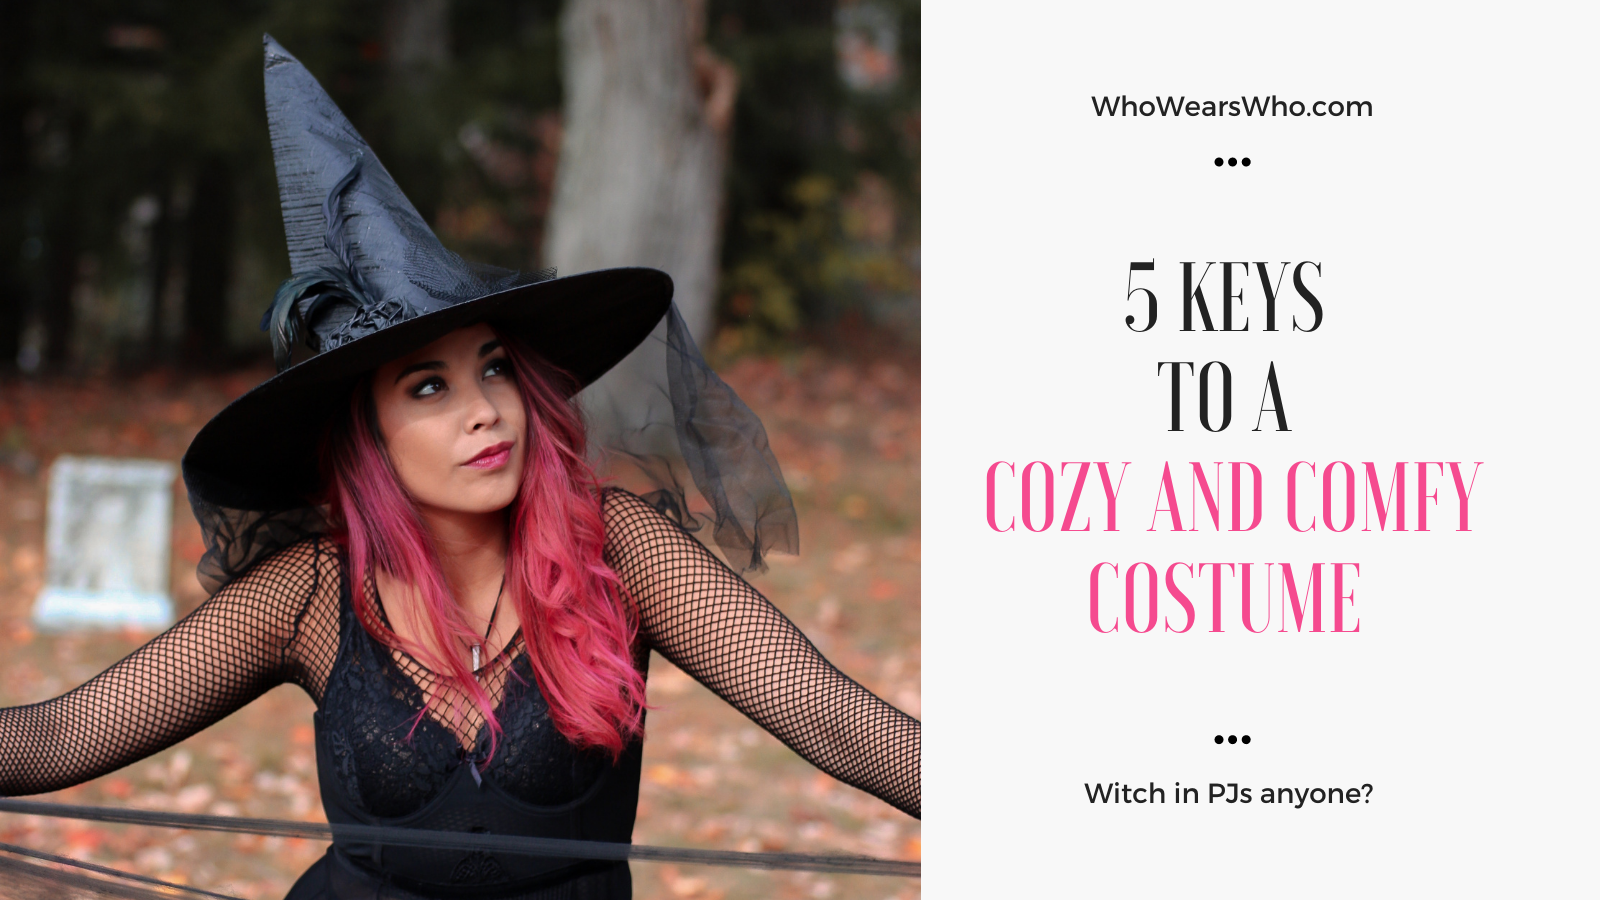 5 Keys to a Cozy and Comfy Costume TW